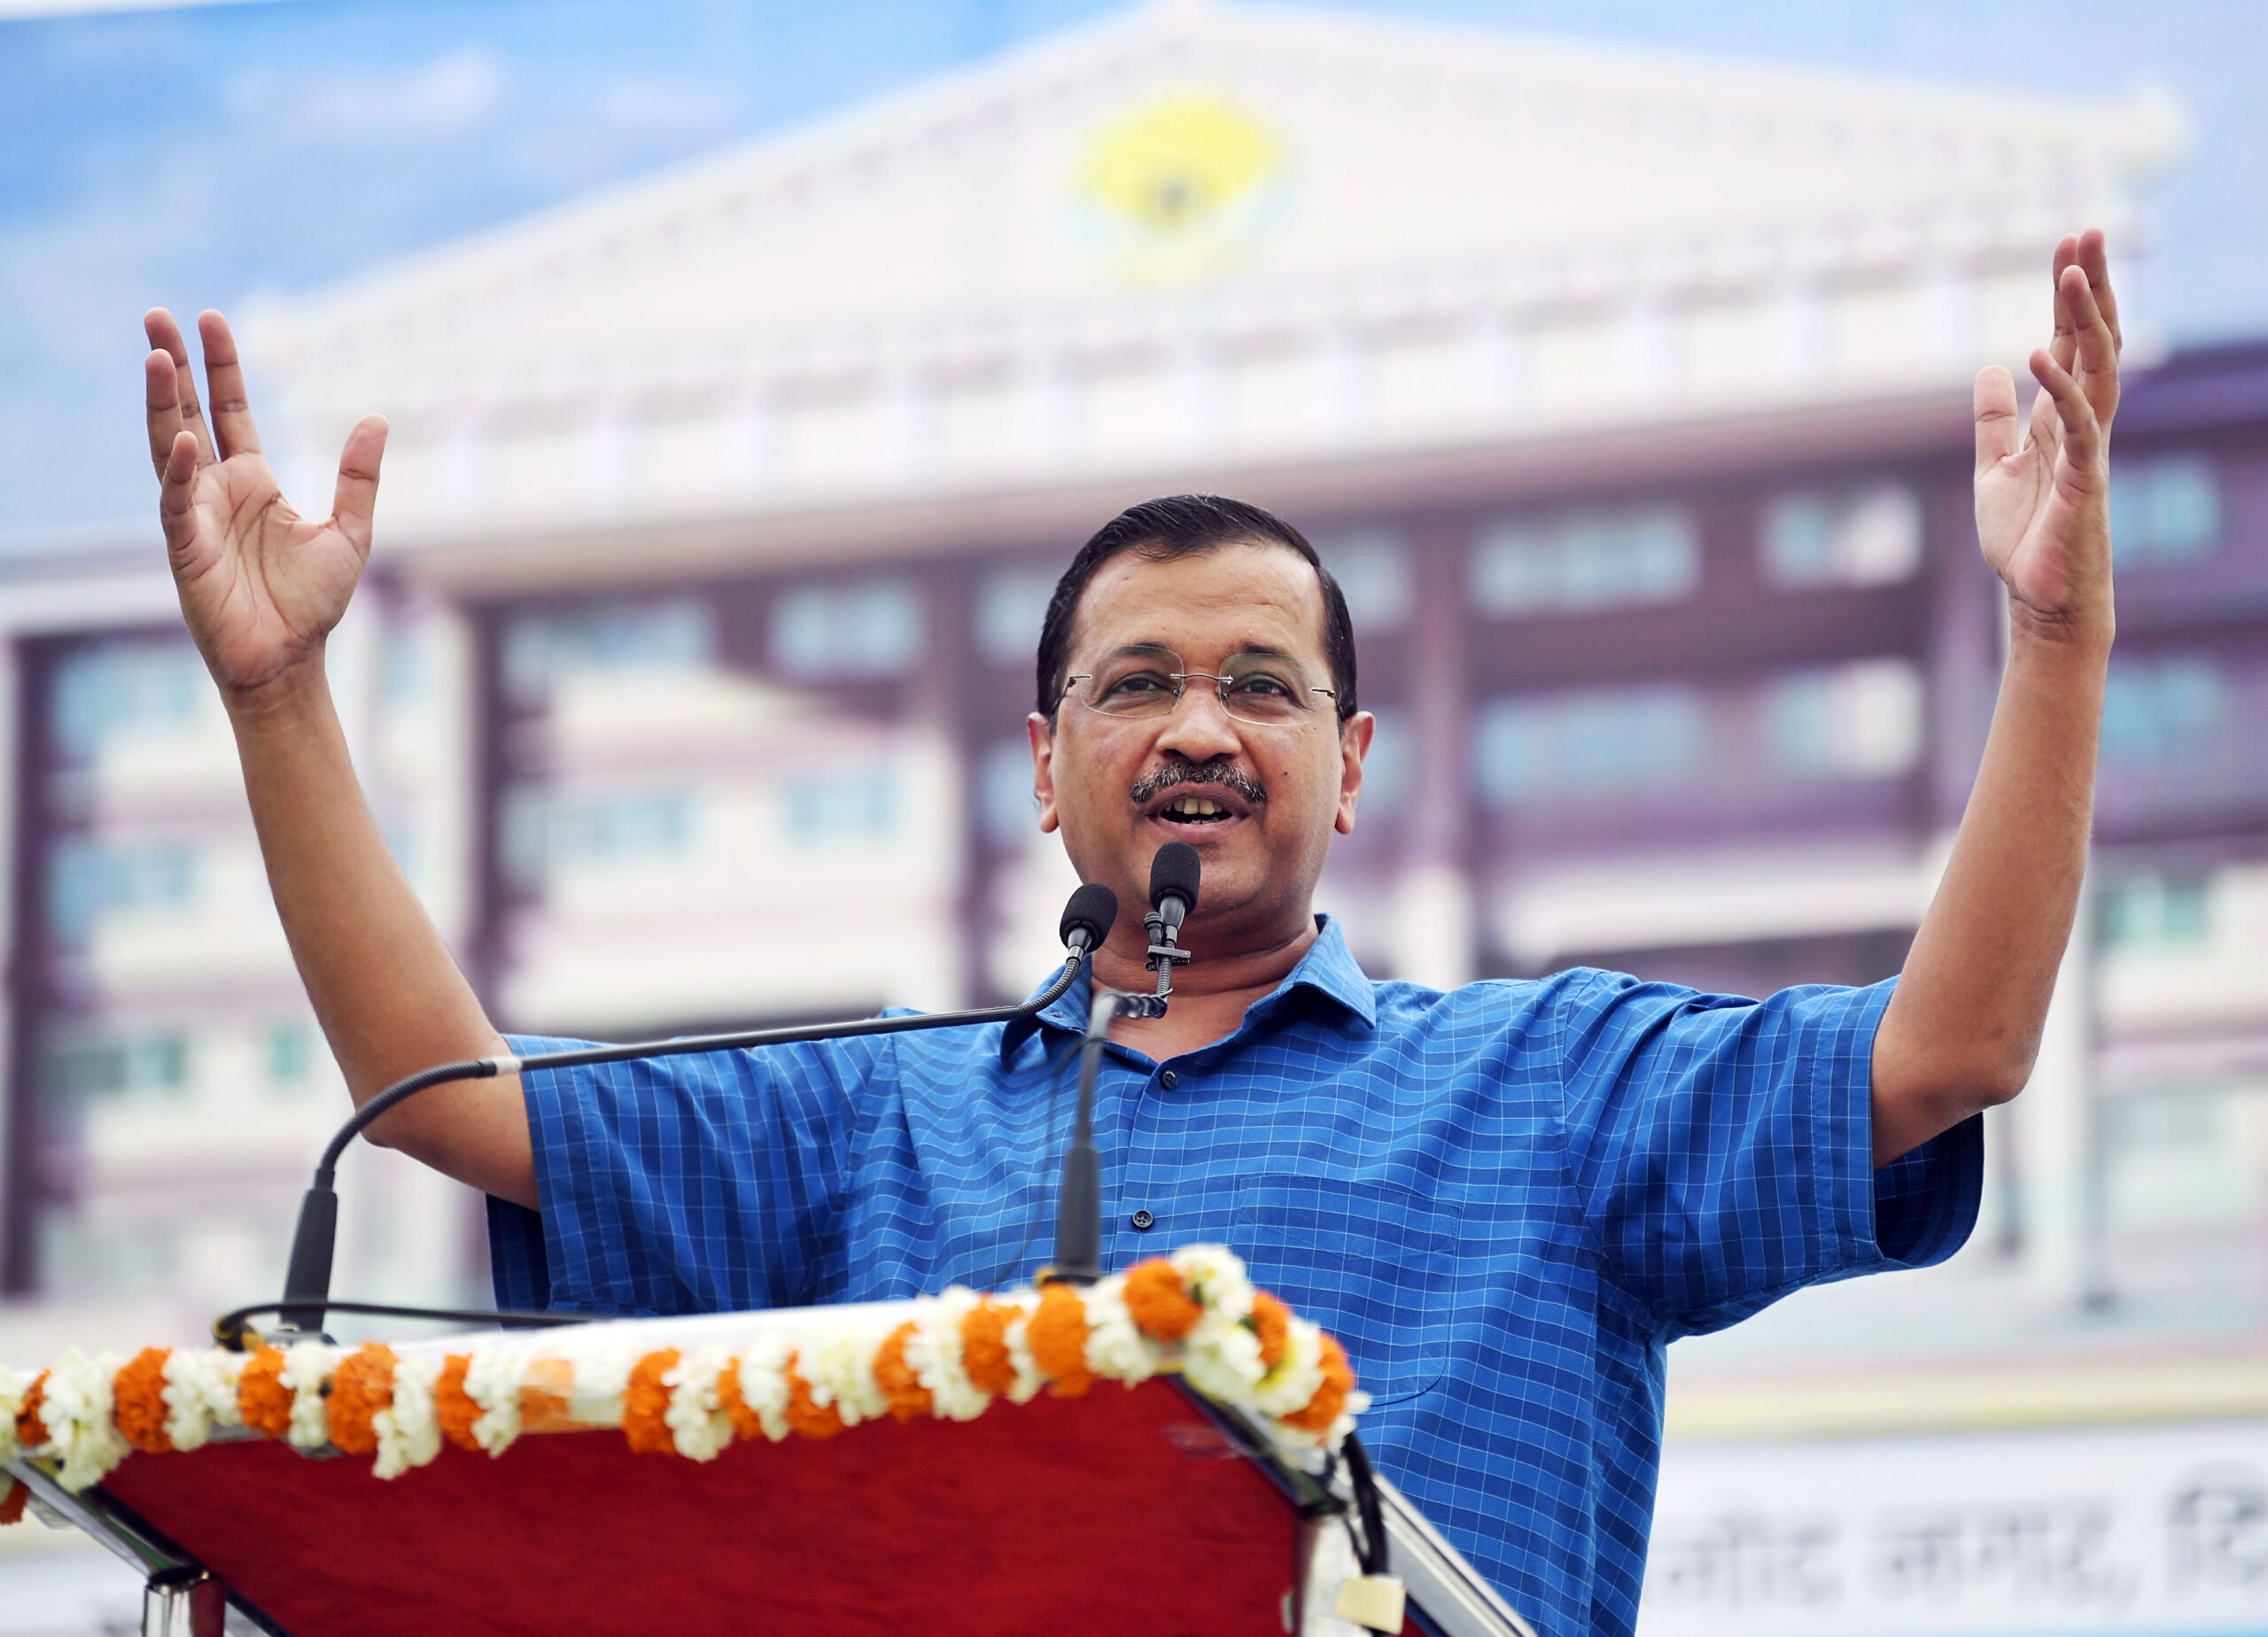  BJP has ‘instructed’ the CBI to arrest me, and I will answer the agency’s questions honestly: CM Kejriwal